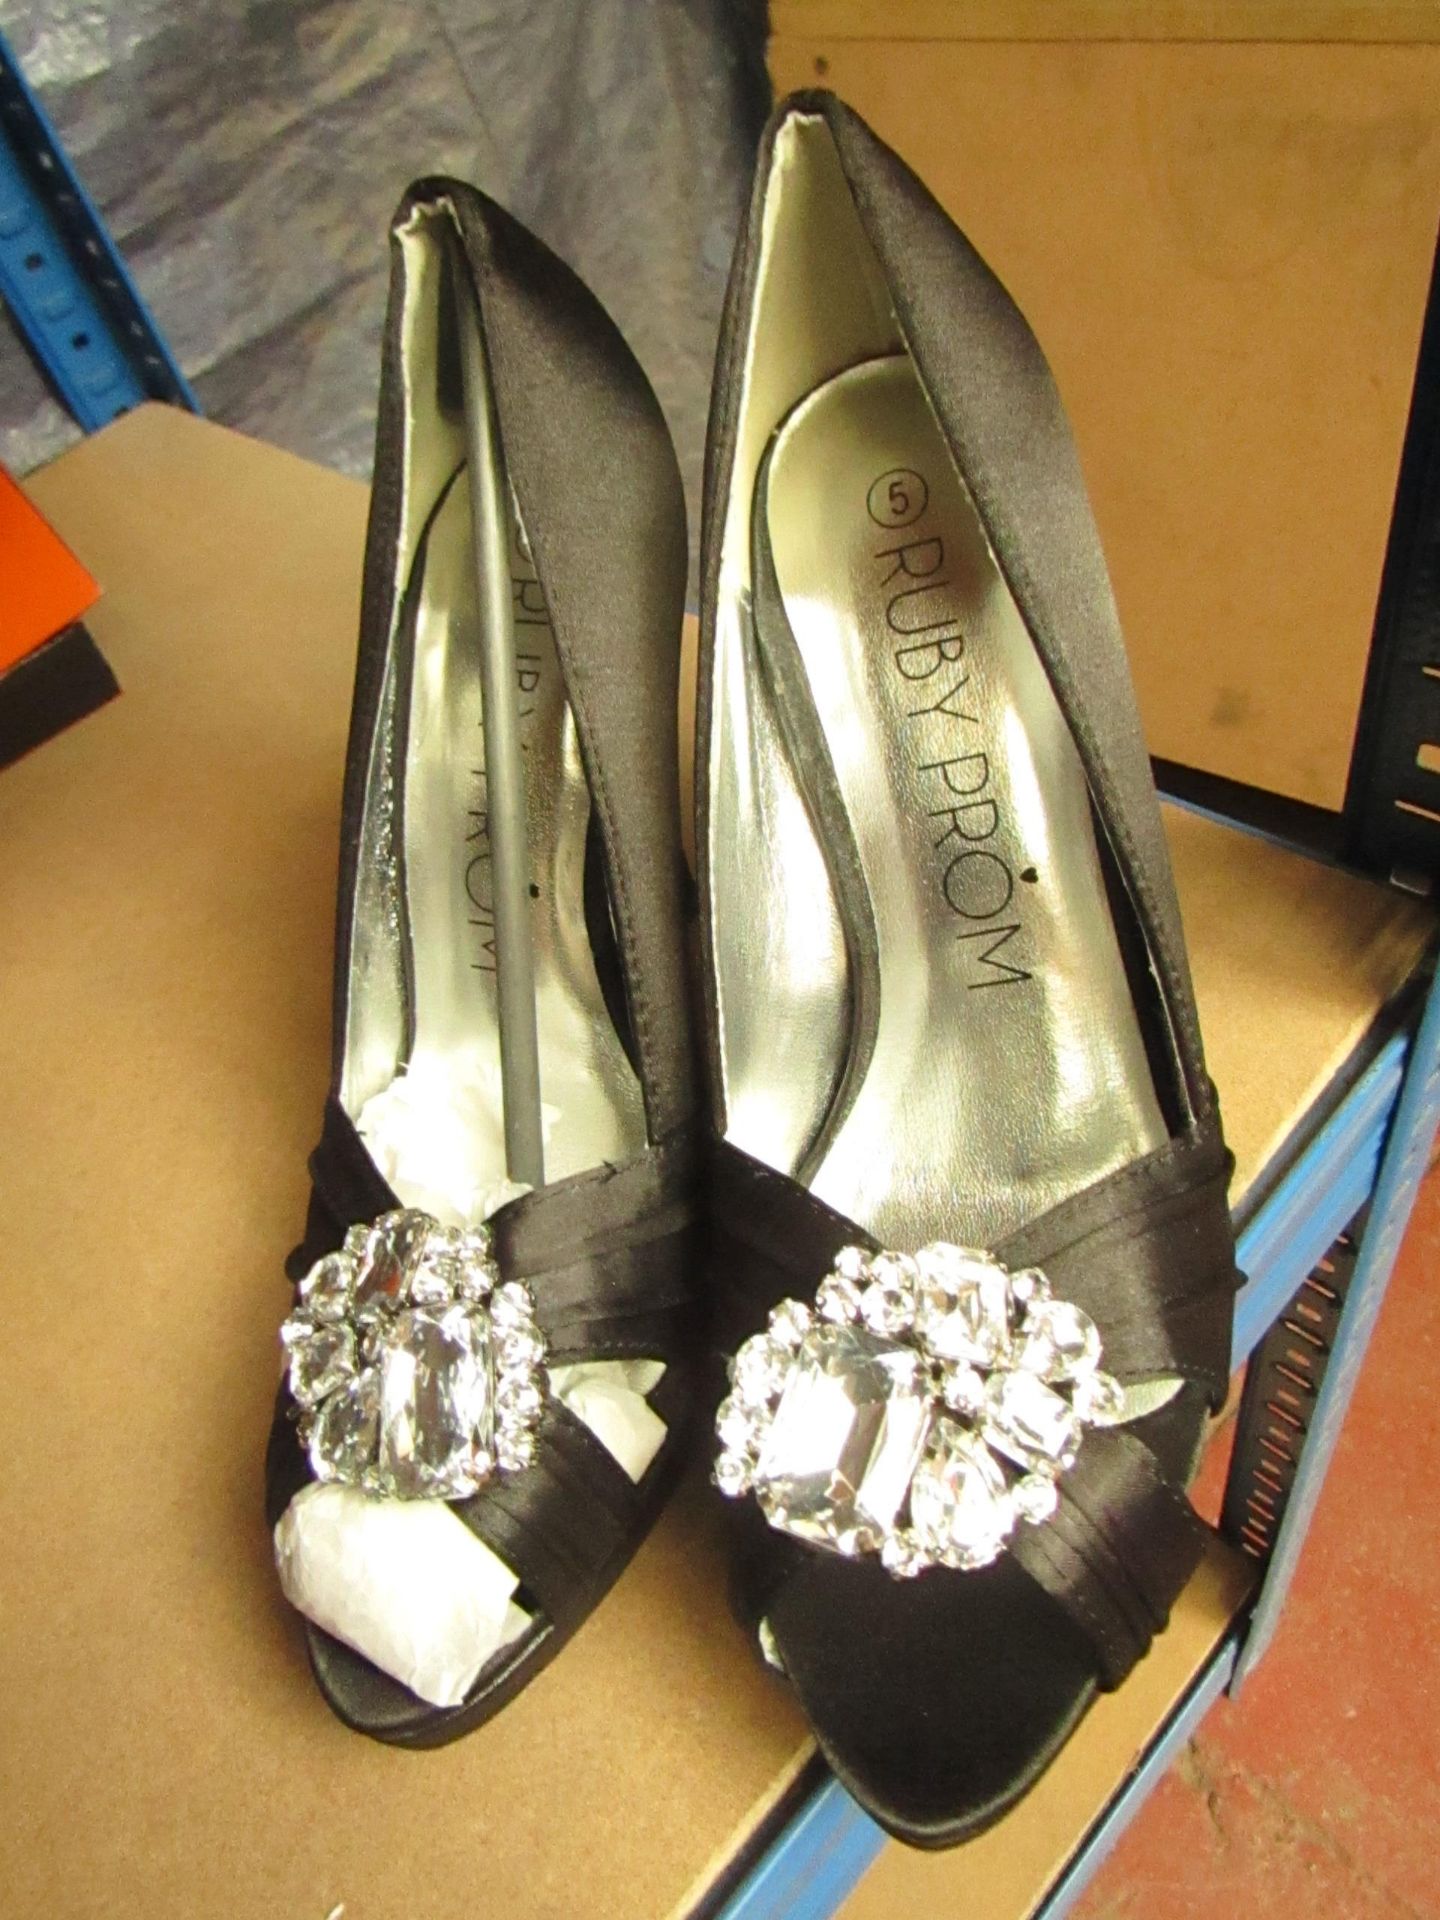 Ruby Prom Black Platform High Heel Shoes with Embelishments size 8 new (see image for design)